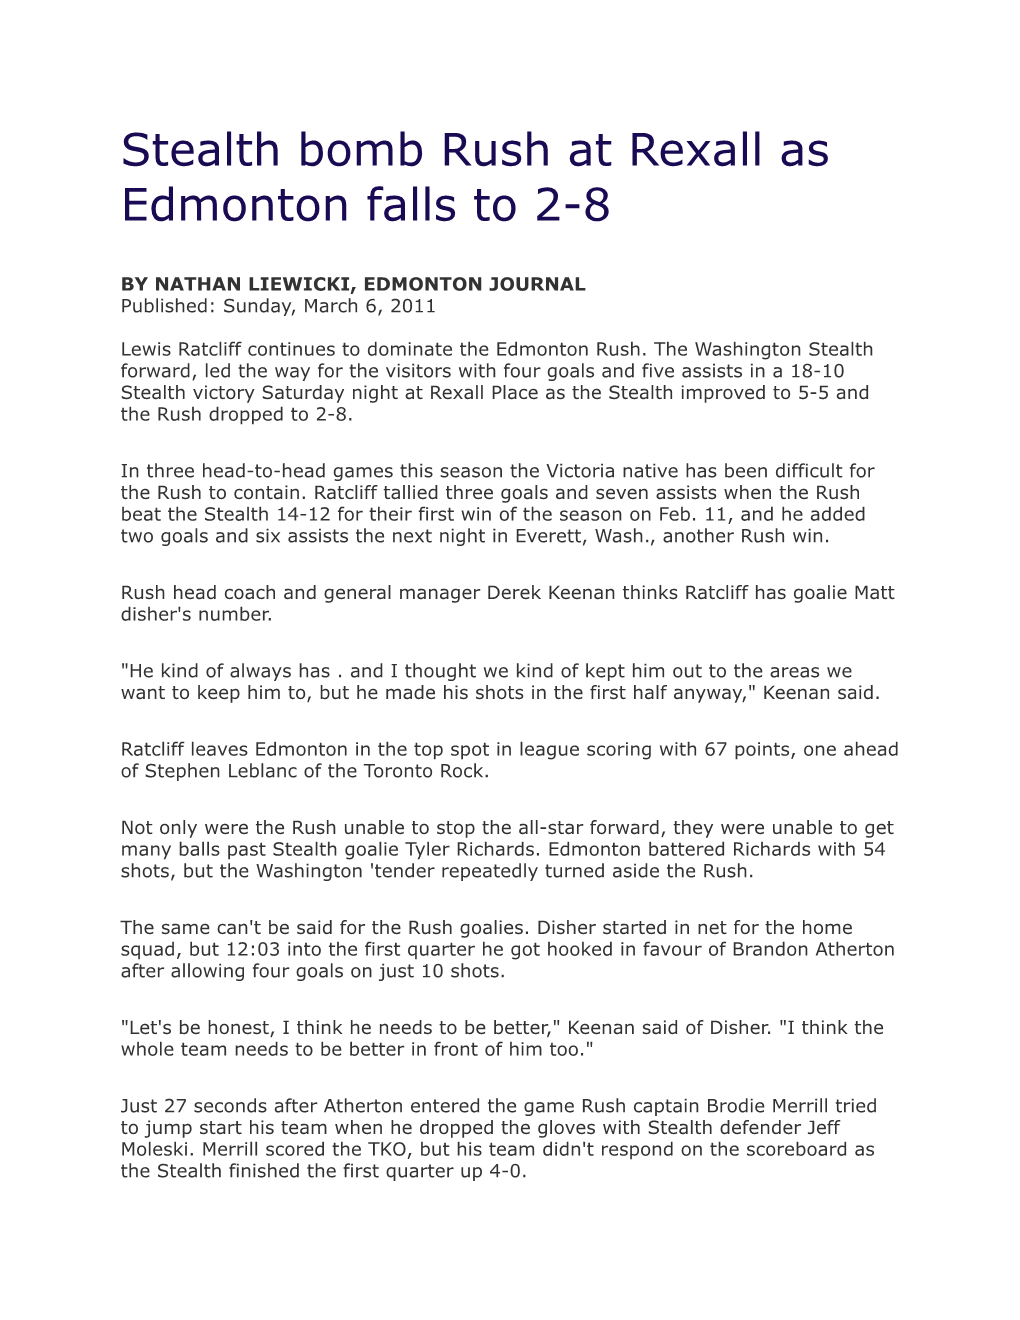 Stealth Bomb Rush at Rexall As Edmonton Falls to 2-8